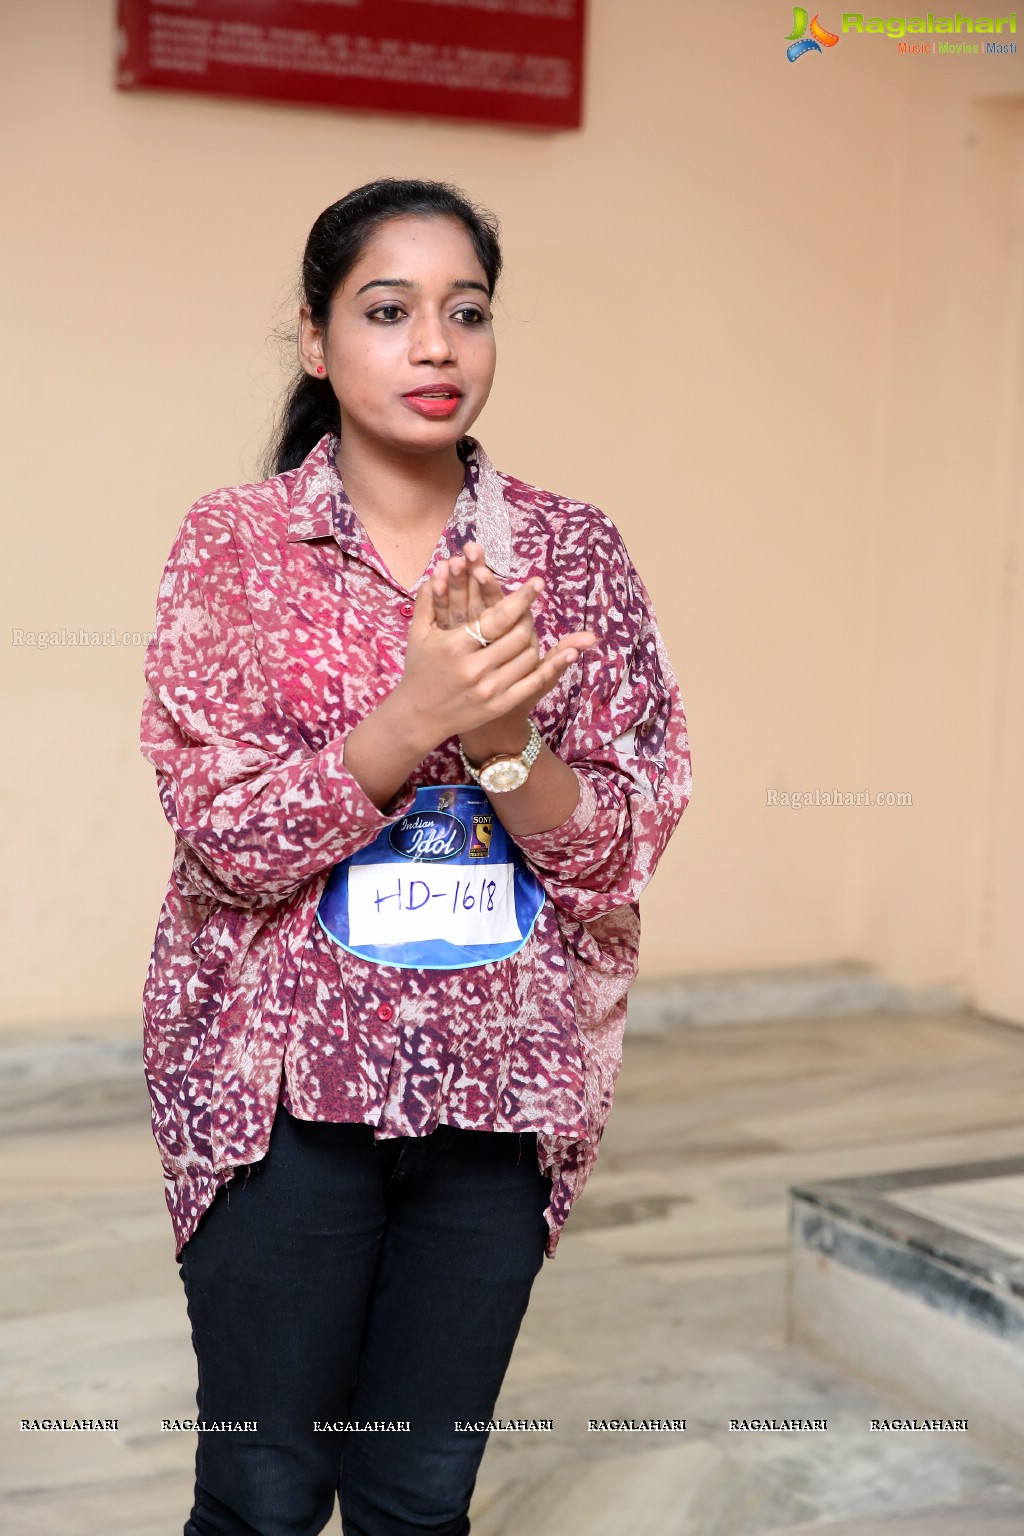 Indian Idol Auditions at ICBM School of Business Excellence, Attapur